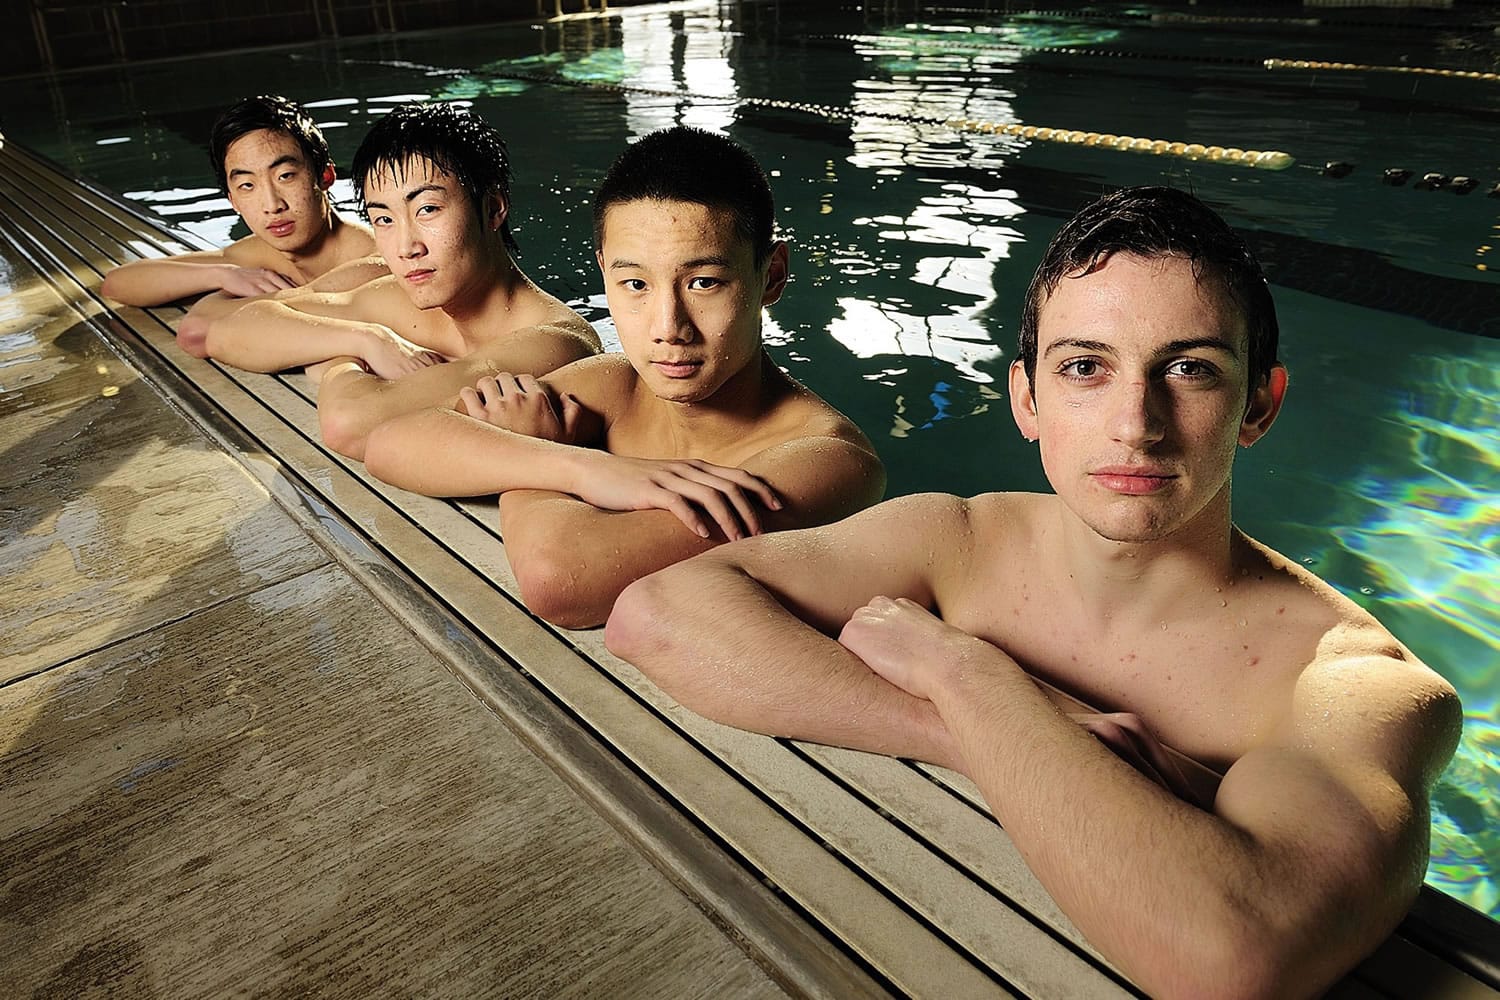 Mountain View's, from left to right, Davin Gong, Alexander Suk, Chris Xue and Kyle Law.